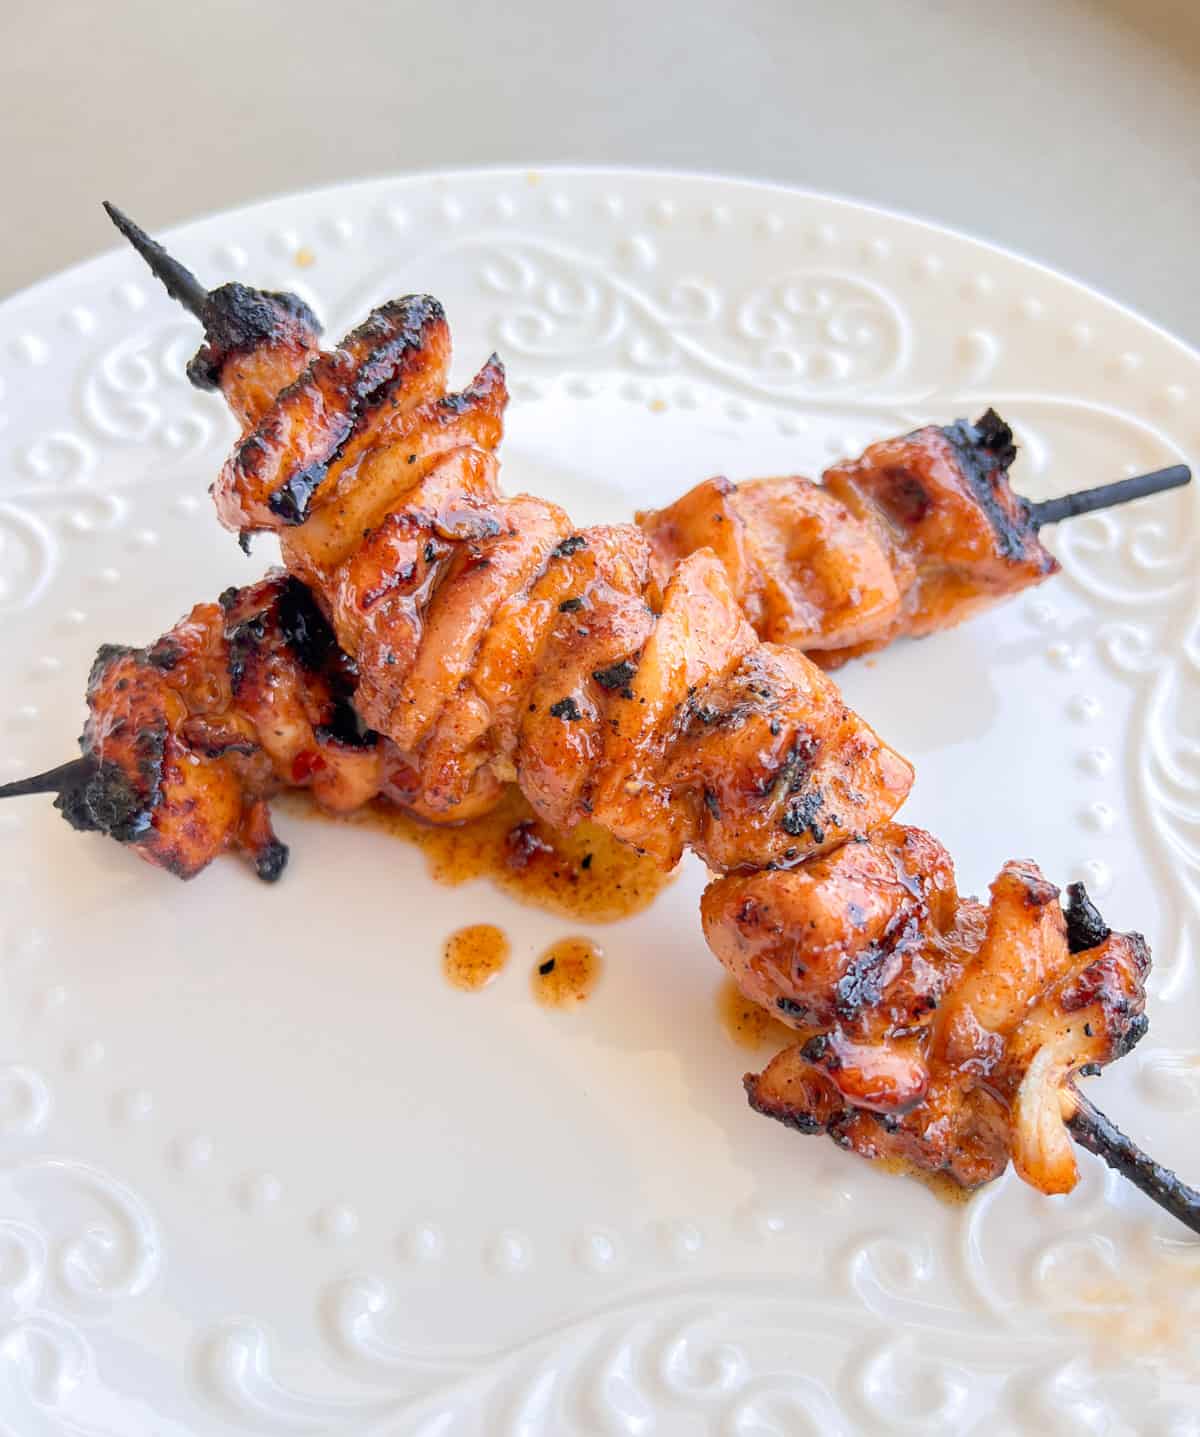 Grilled chicken kabobs on a plate.